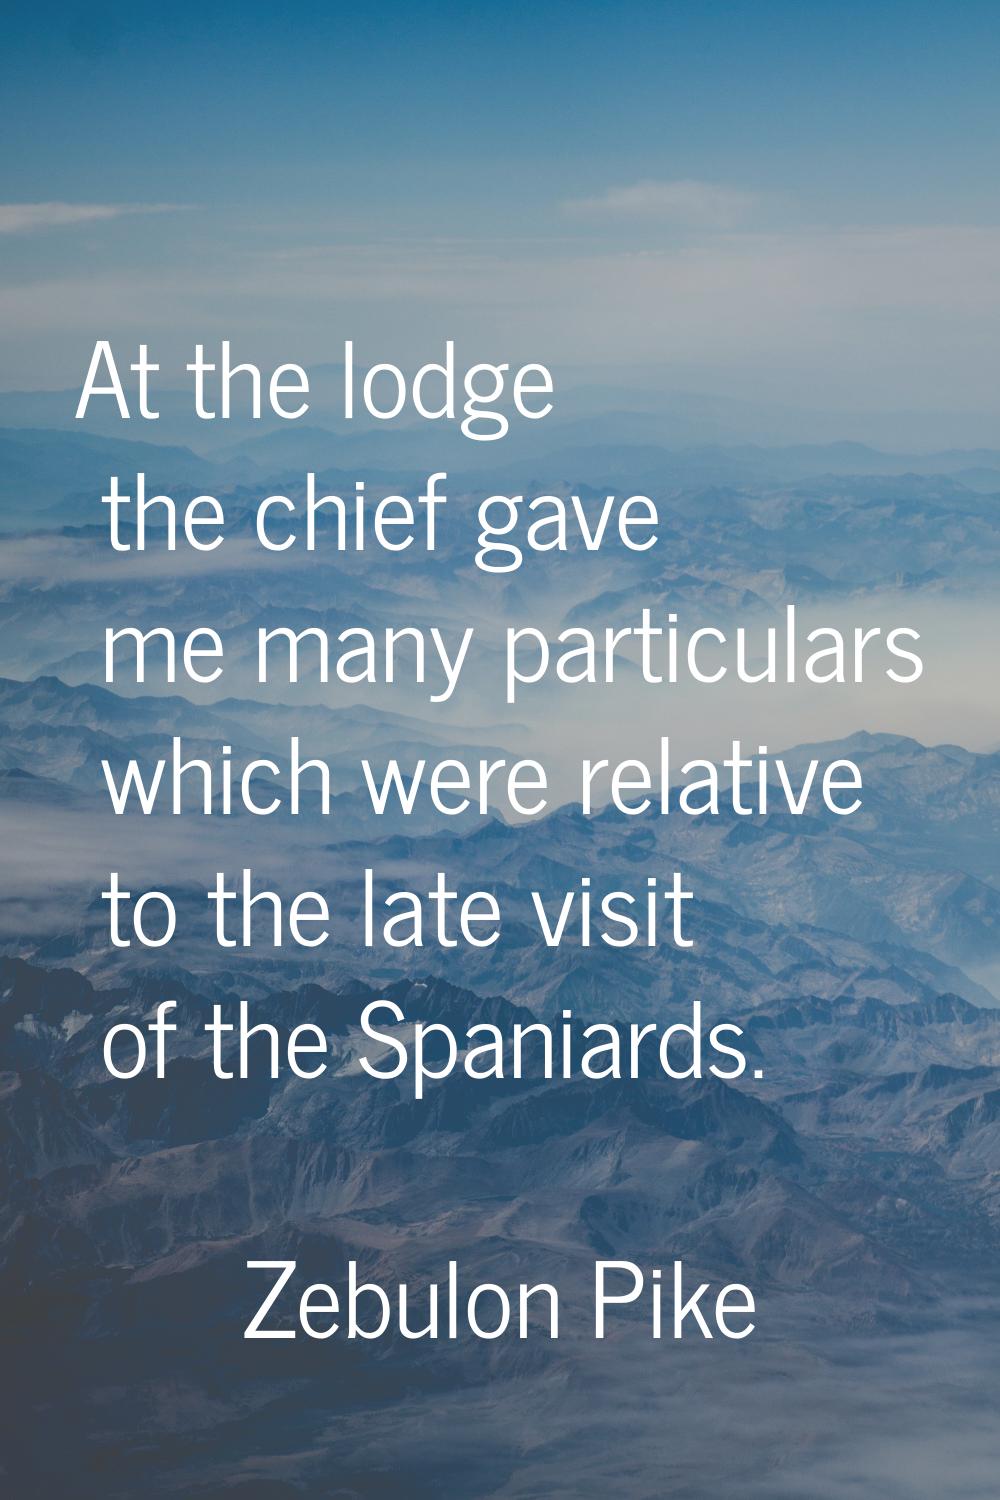 At the lodge the chief gave me many particulars which were relative to the late visit of the Spania